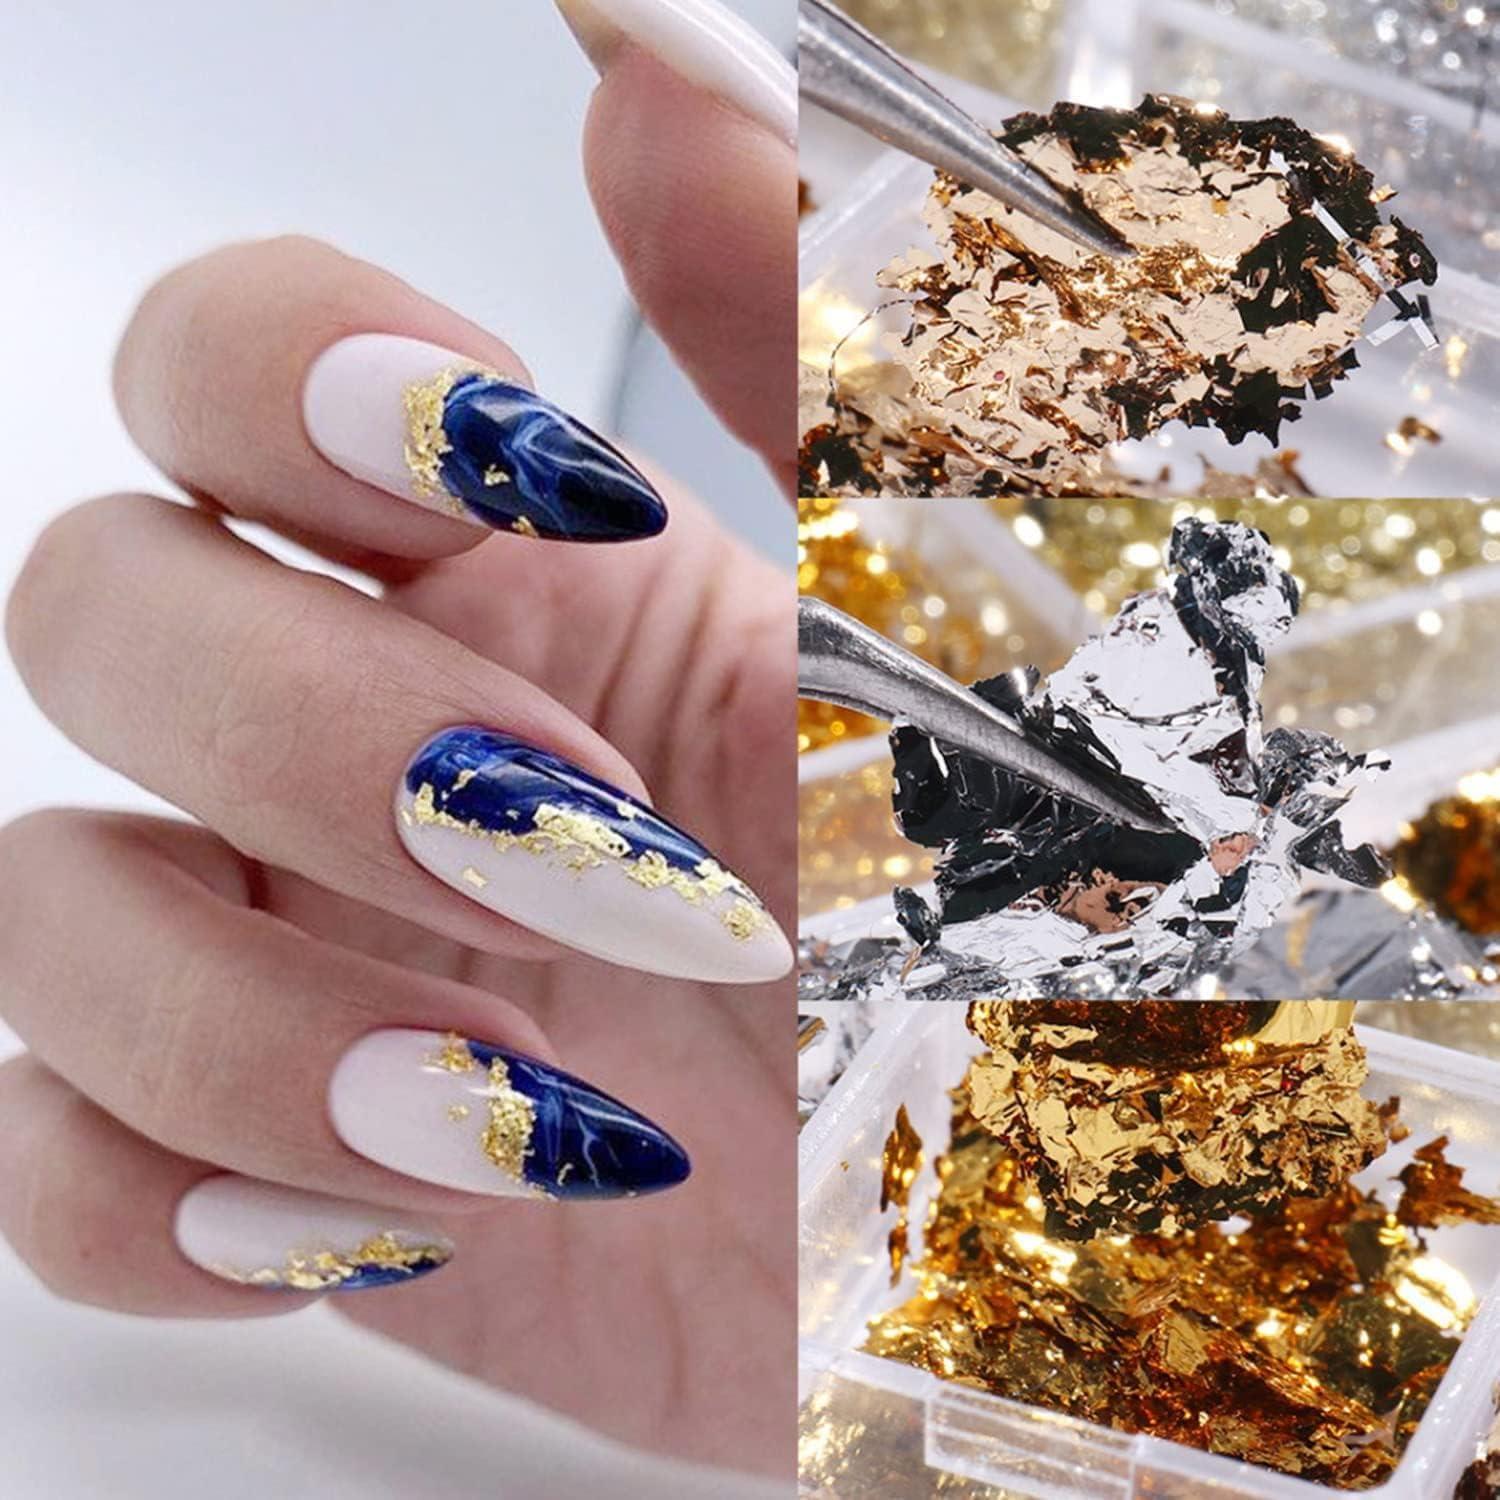  12 Grids Nail Foils Nail Art Foil Flakes, Holographic Glitter  Sequins Mirror Effect Design Confetti Gold Silver Nail Foil Flakes for  Women Girls Gold Silver Glitter Aluminum Flakes DIY Manicure Tips 